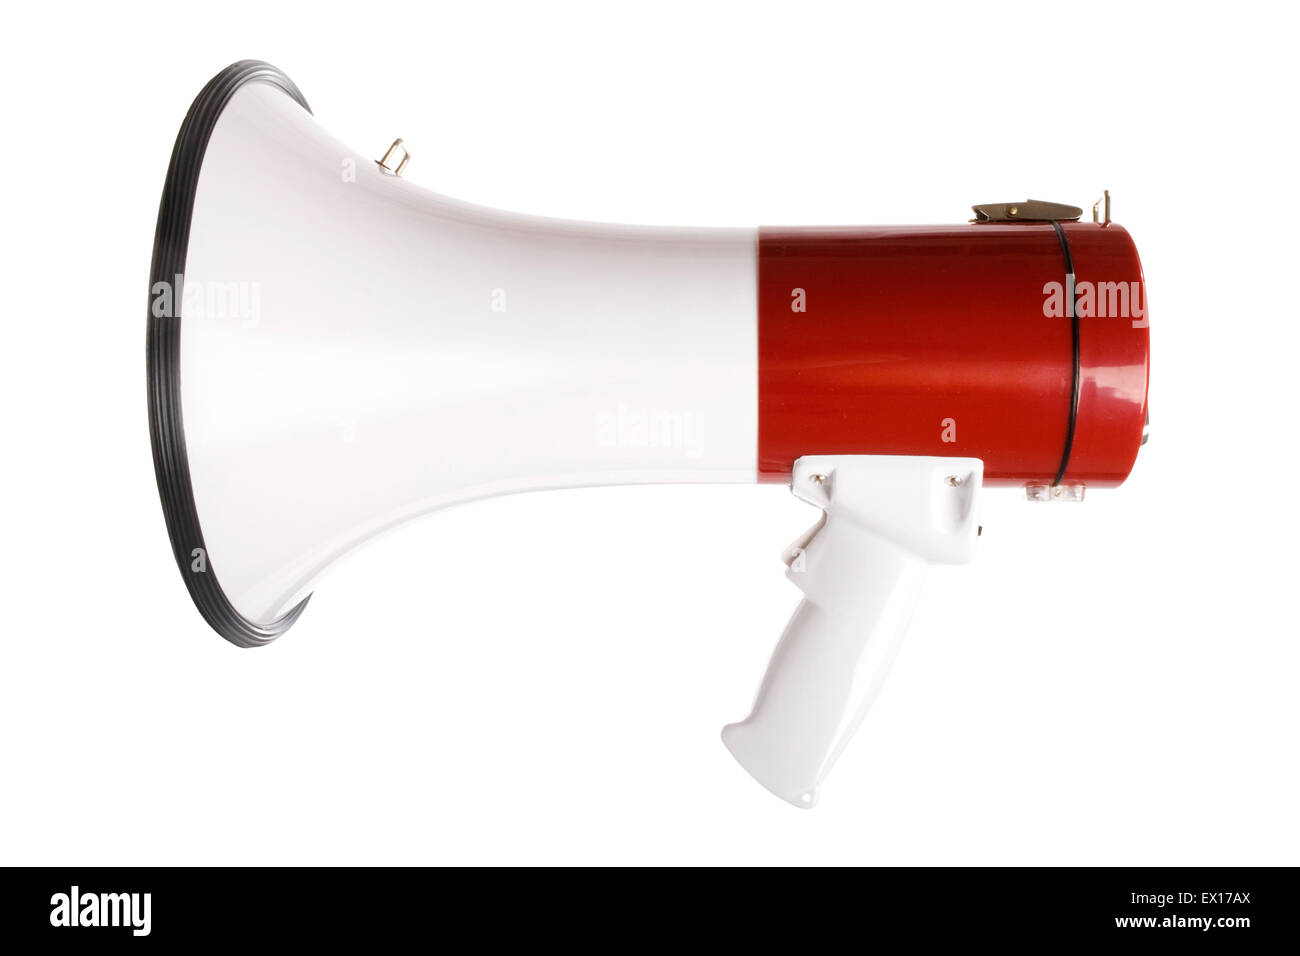 Stock image of red and white megaphone isolated on white Stock Photo